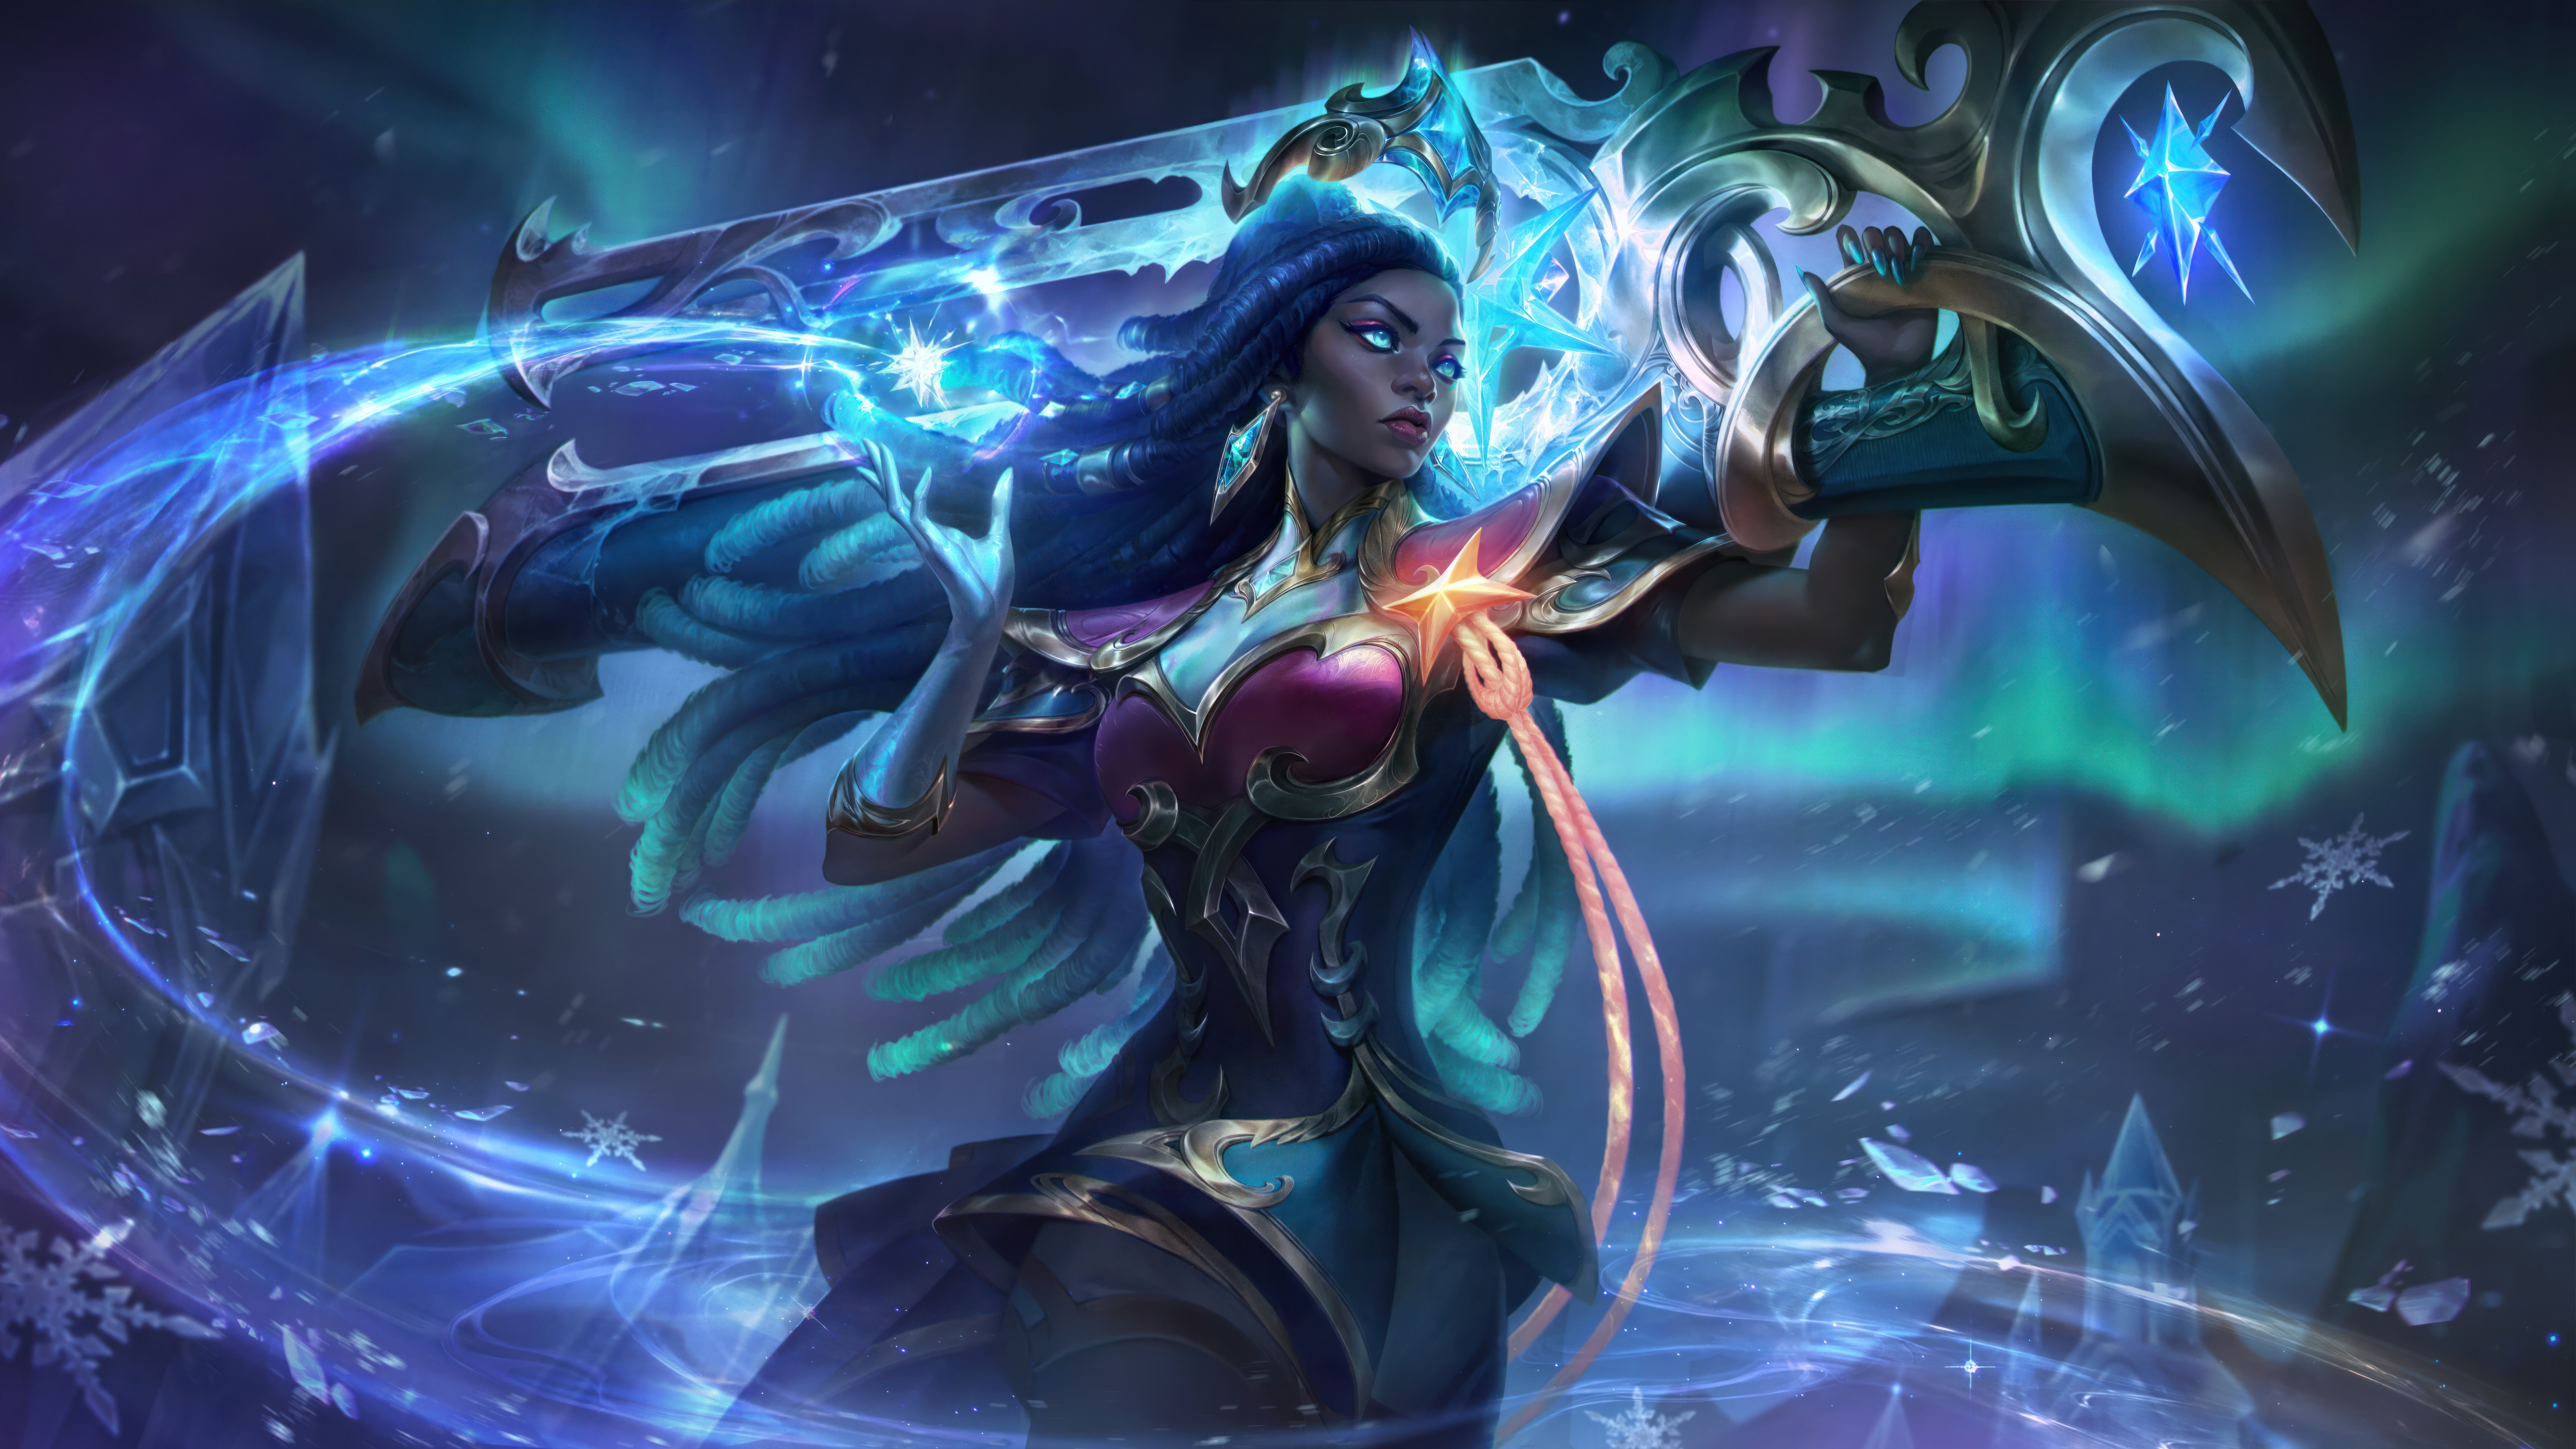 General 7680x4320 League of Legends digital art Riot Games GZG video games Winterblessed (League of Legends) Senna (League of Legends) video game characters 4K video game art dreadlocks video game girls lights aurorae looking away night snowflakes long hair